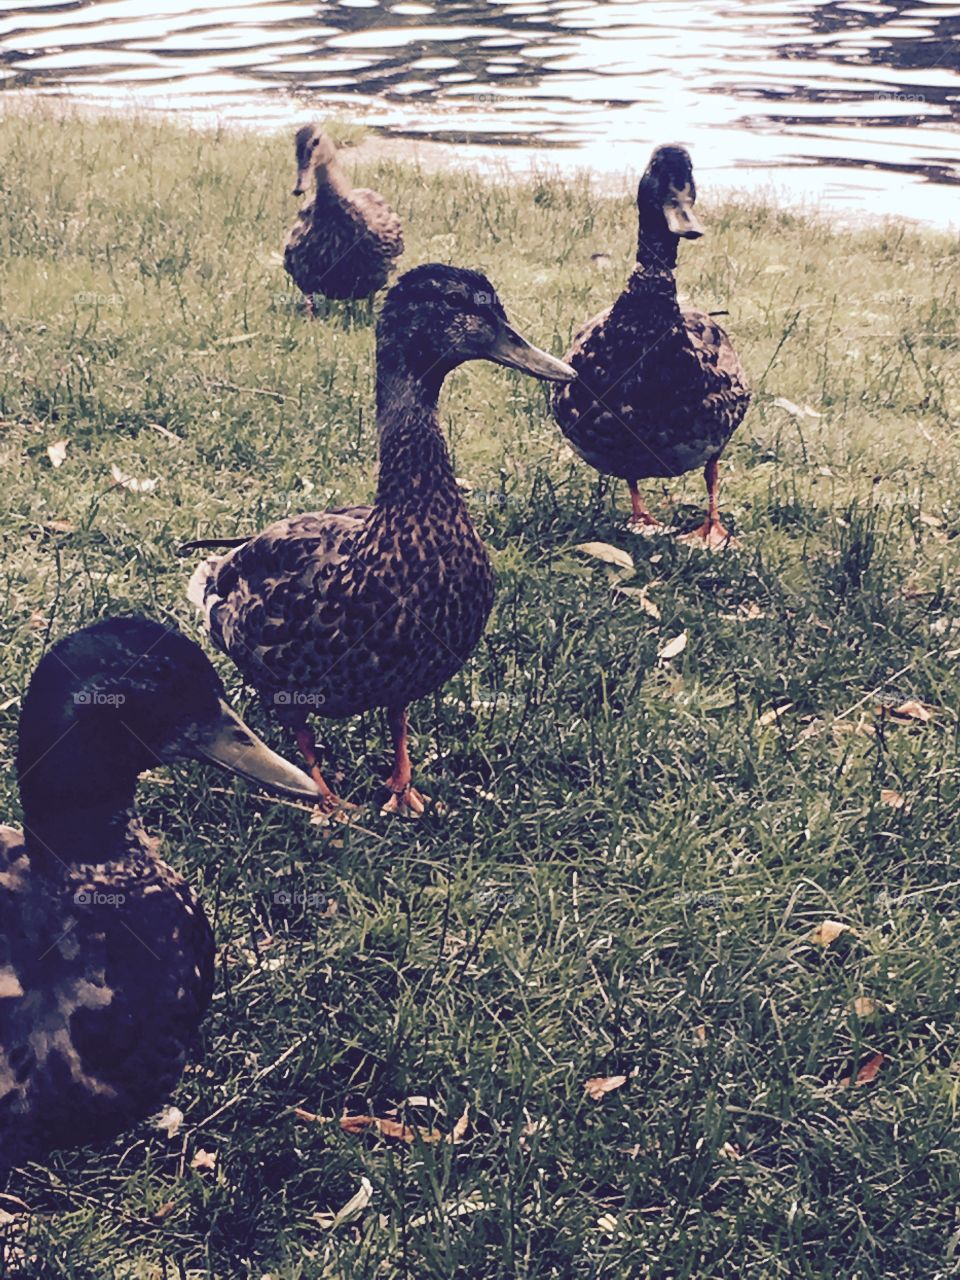 A group of ducks on some grass at a public park 